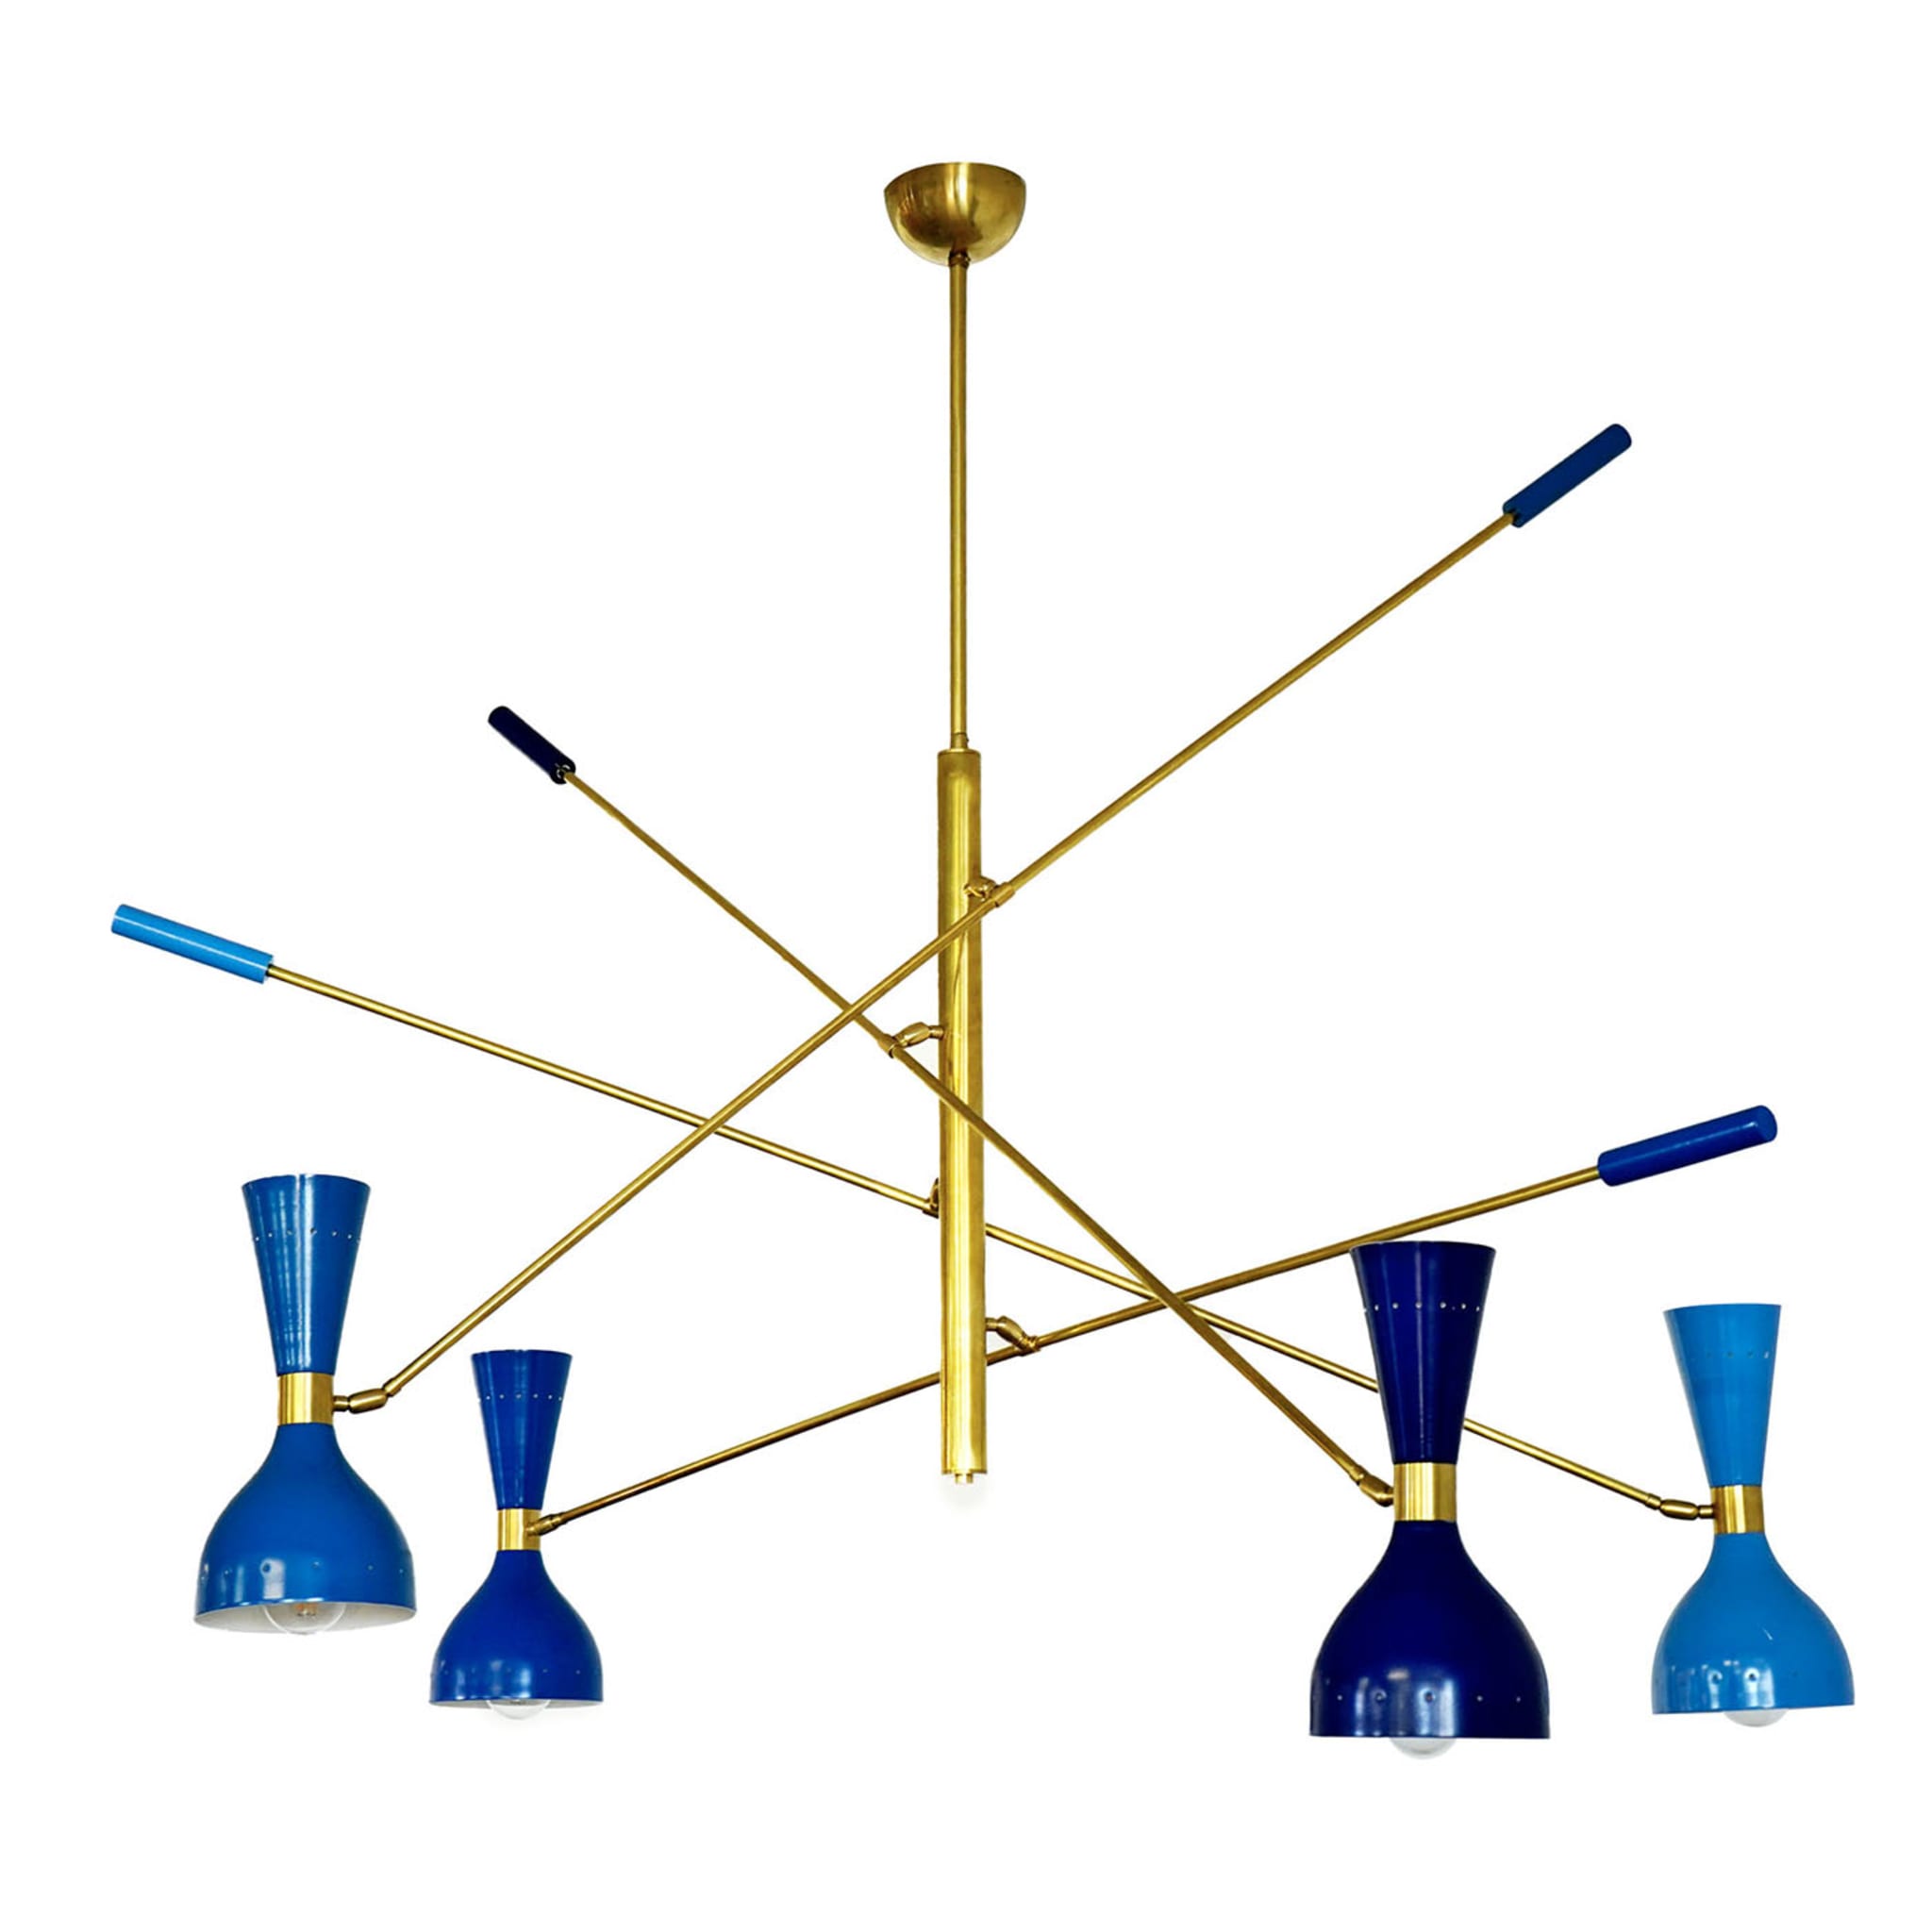 Contrappeso Chandelier, 4 hues of blue "Quadriennale" - Main view